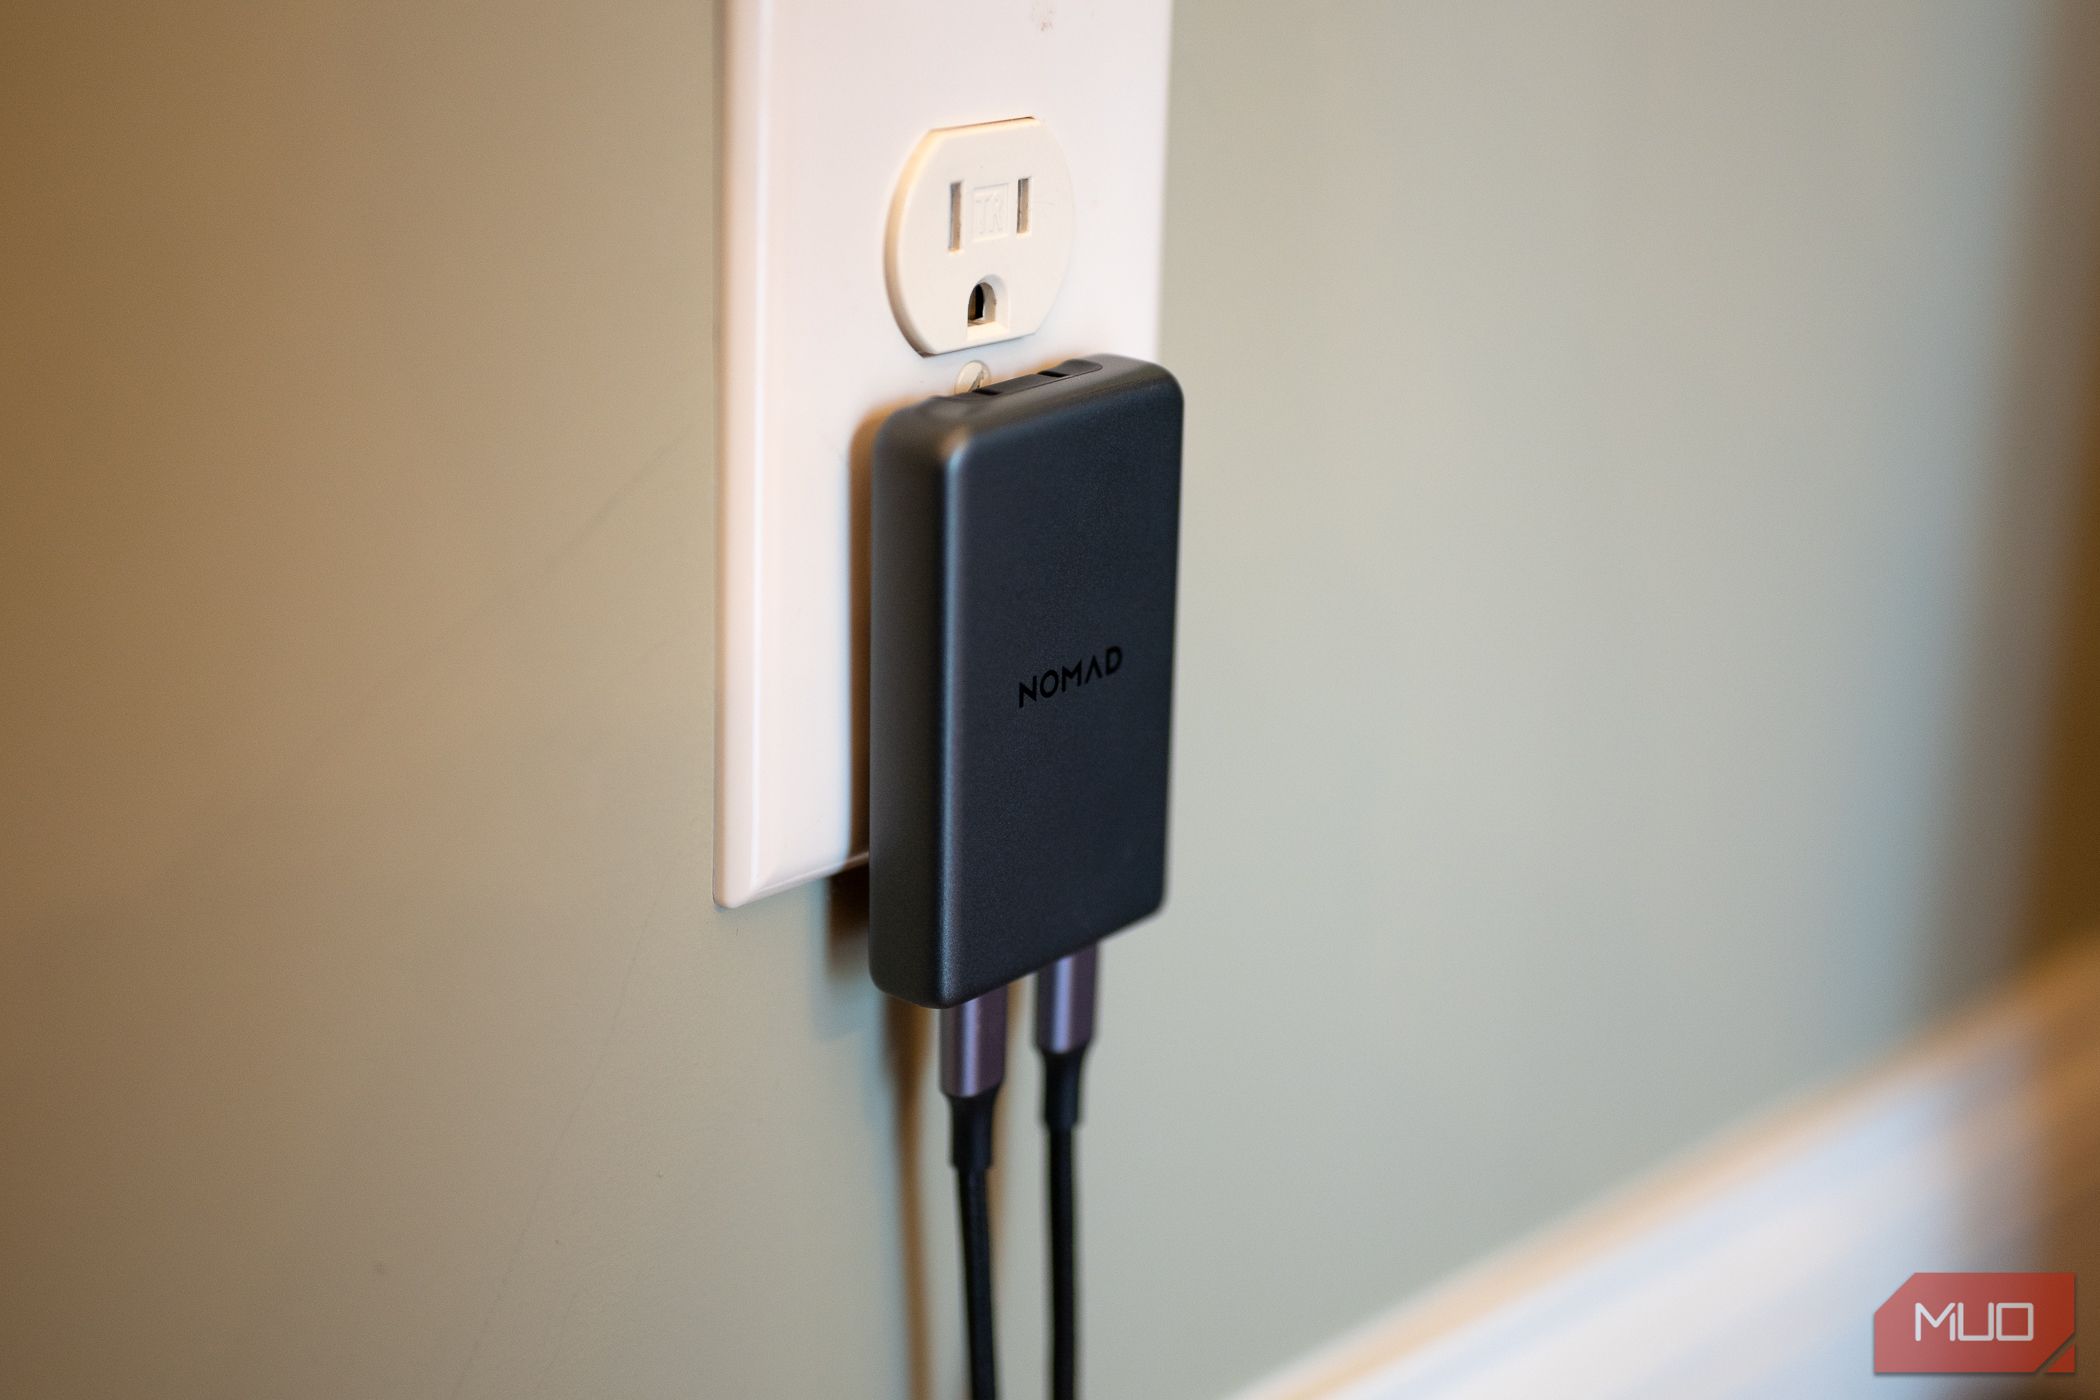 Nomad 65W Slim Power Adapter plugged into a wall outlet with USB-C cables